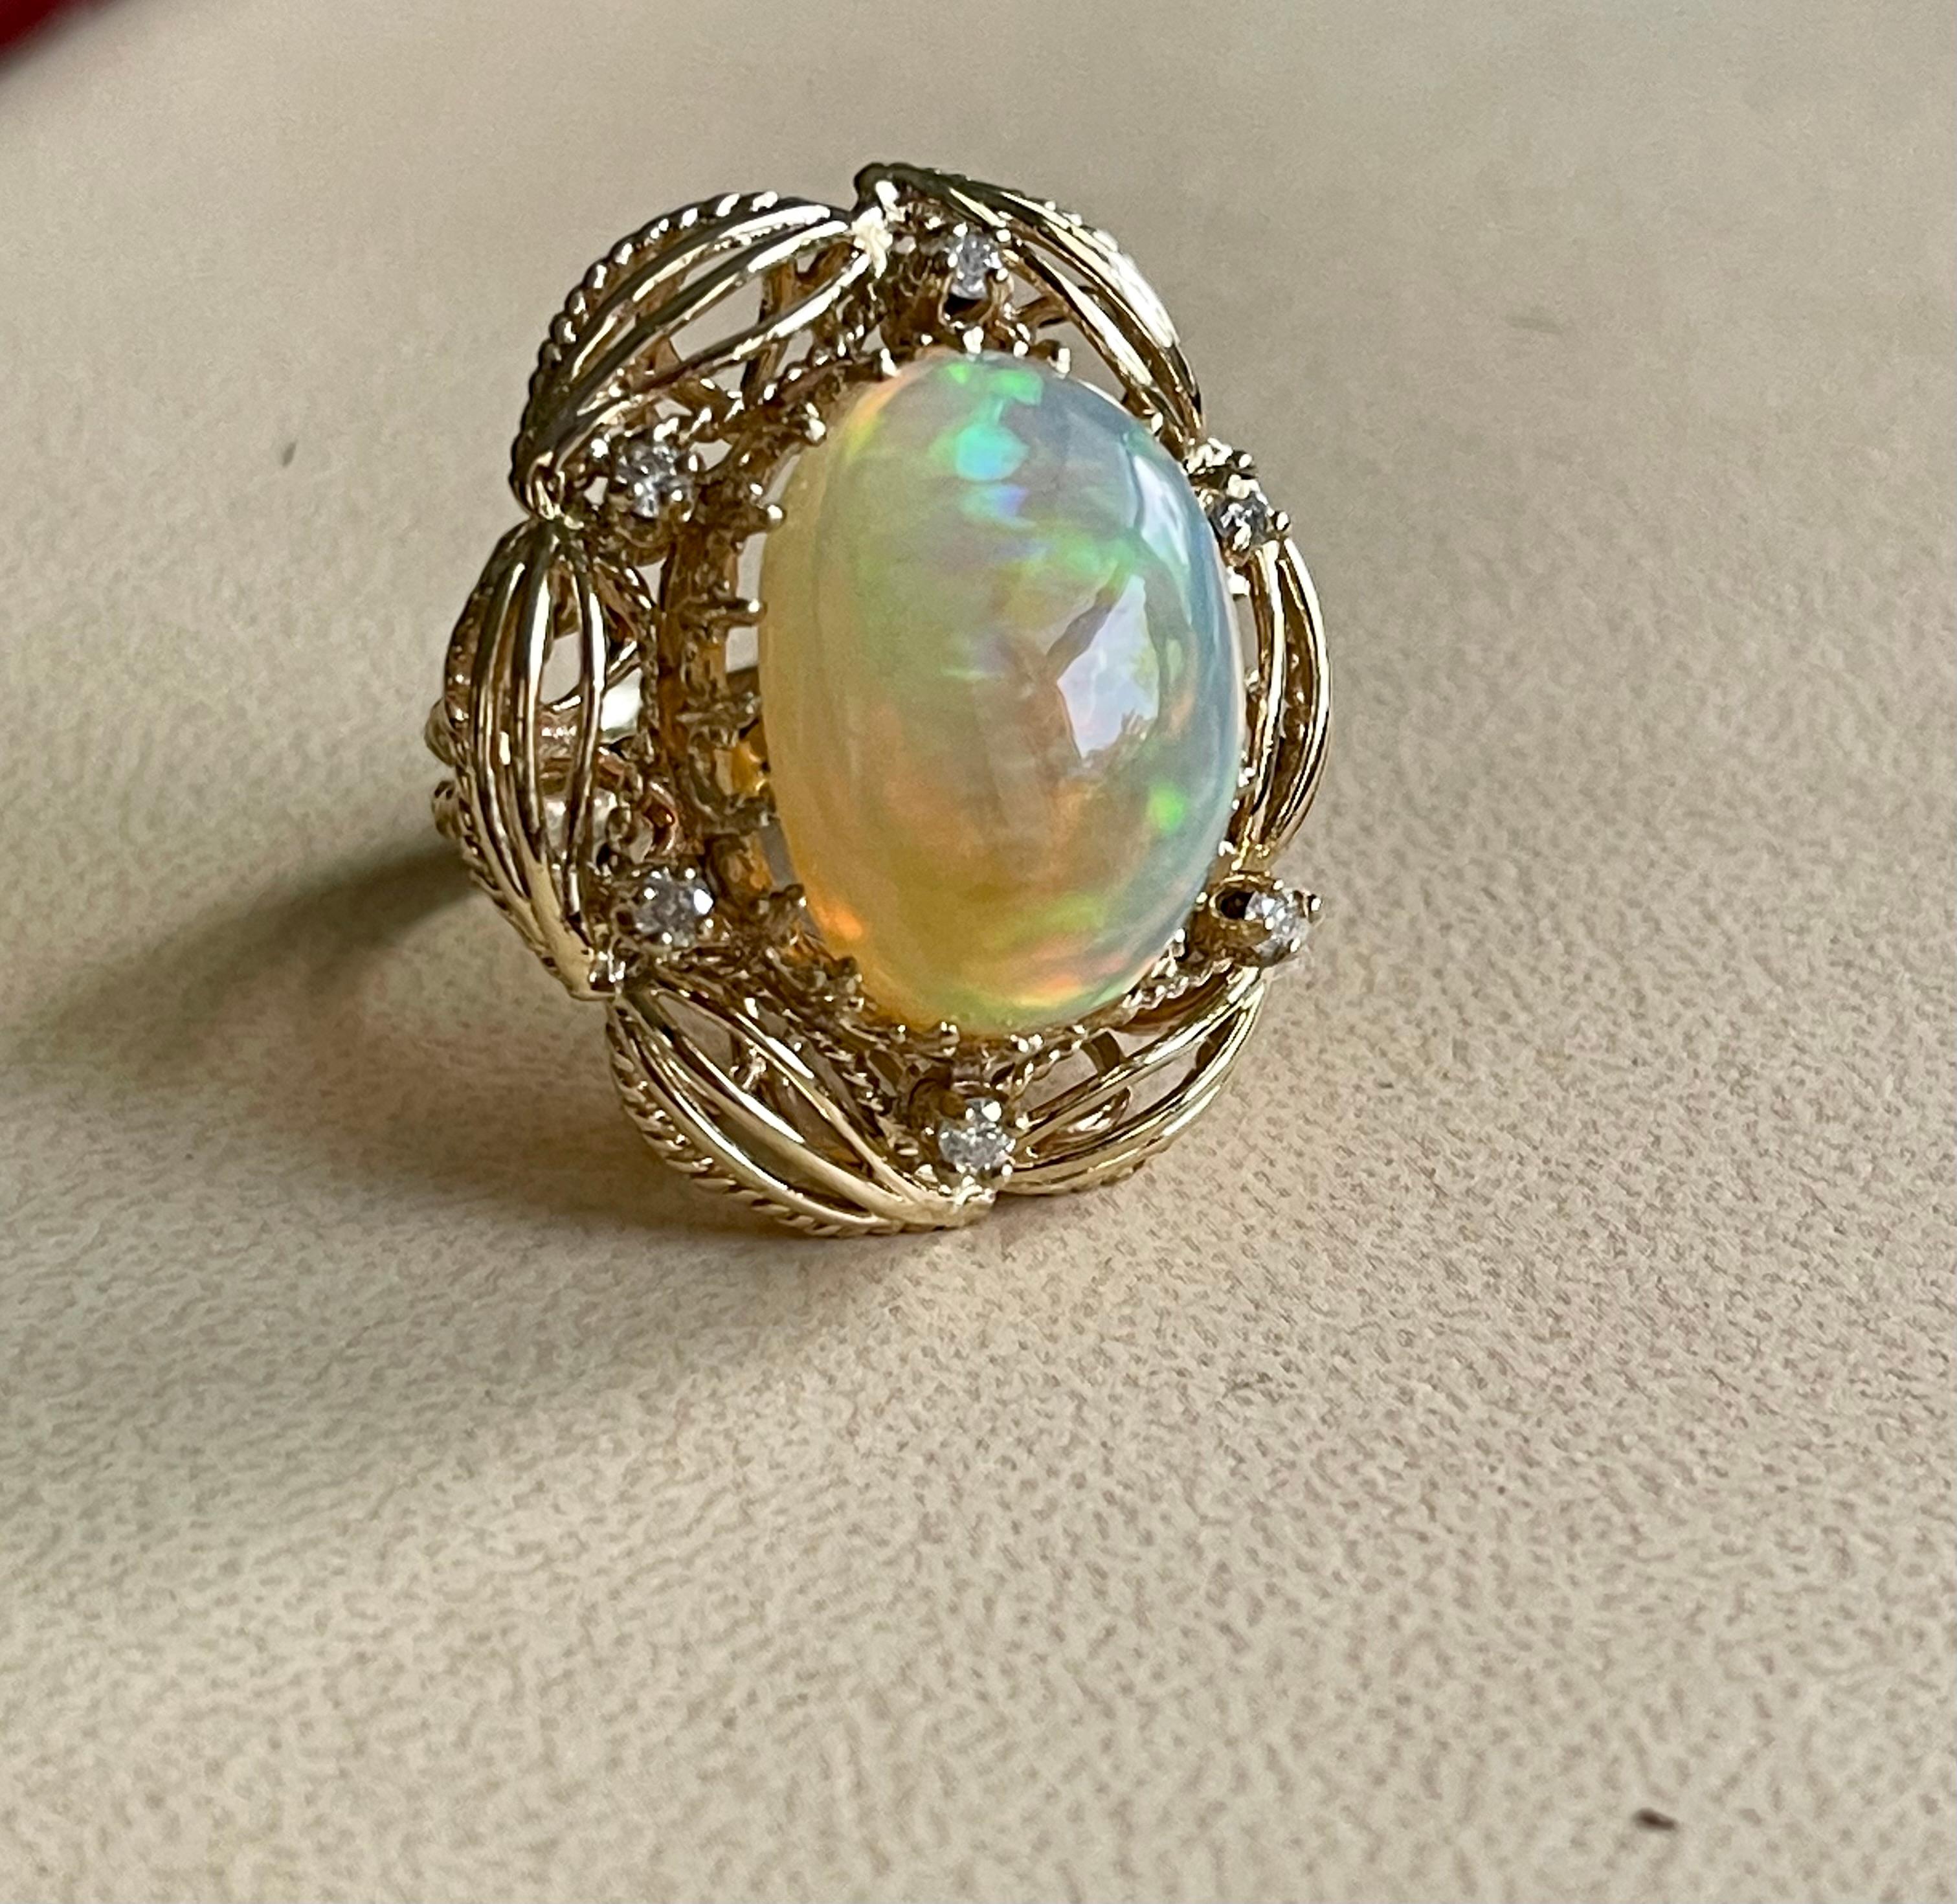 15 Carat Oval Shape Ethiopian Opal Cocktail Ring 14 Karat Yellow Gold Solid Ring 3